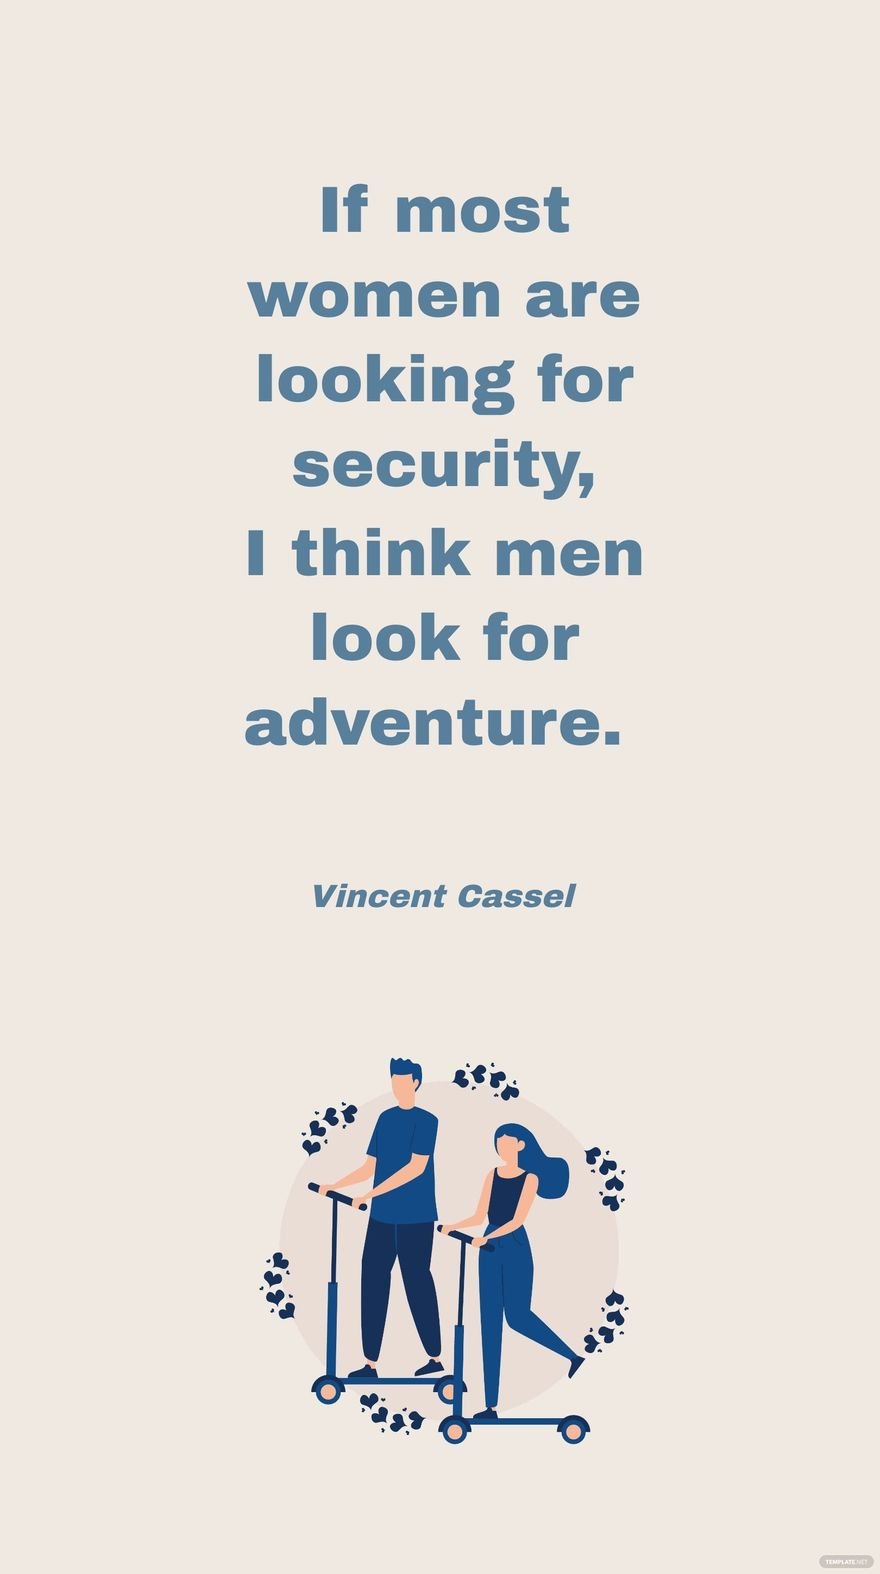 Free Vincent Cassel - If most women are looking for security, I think men look for adventure. in JPG